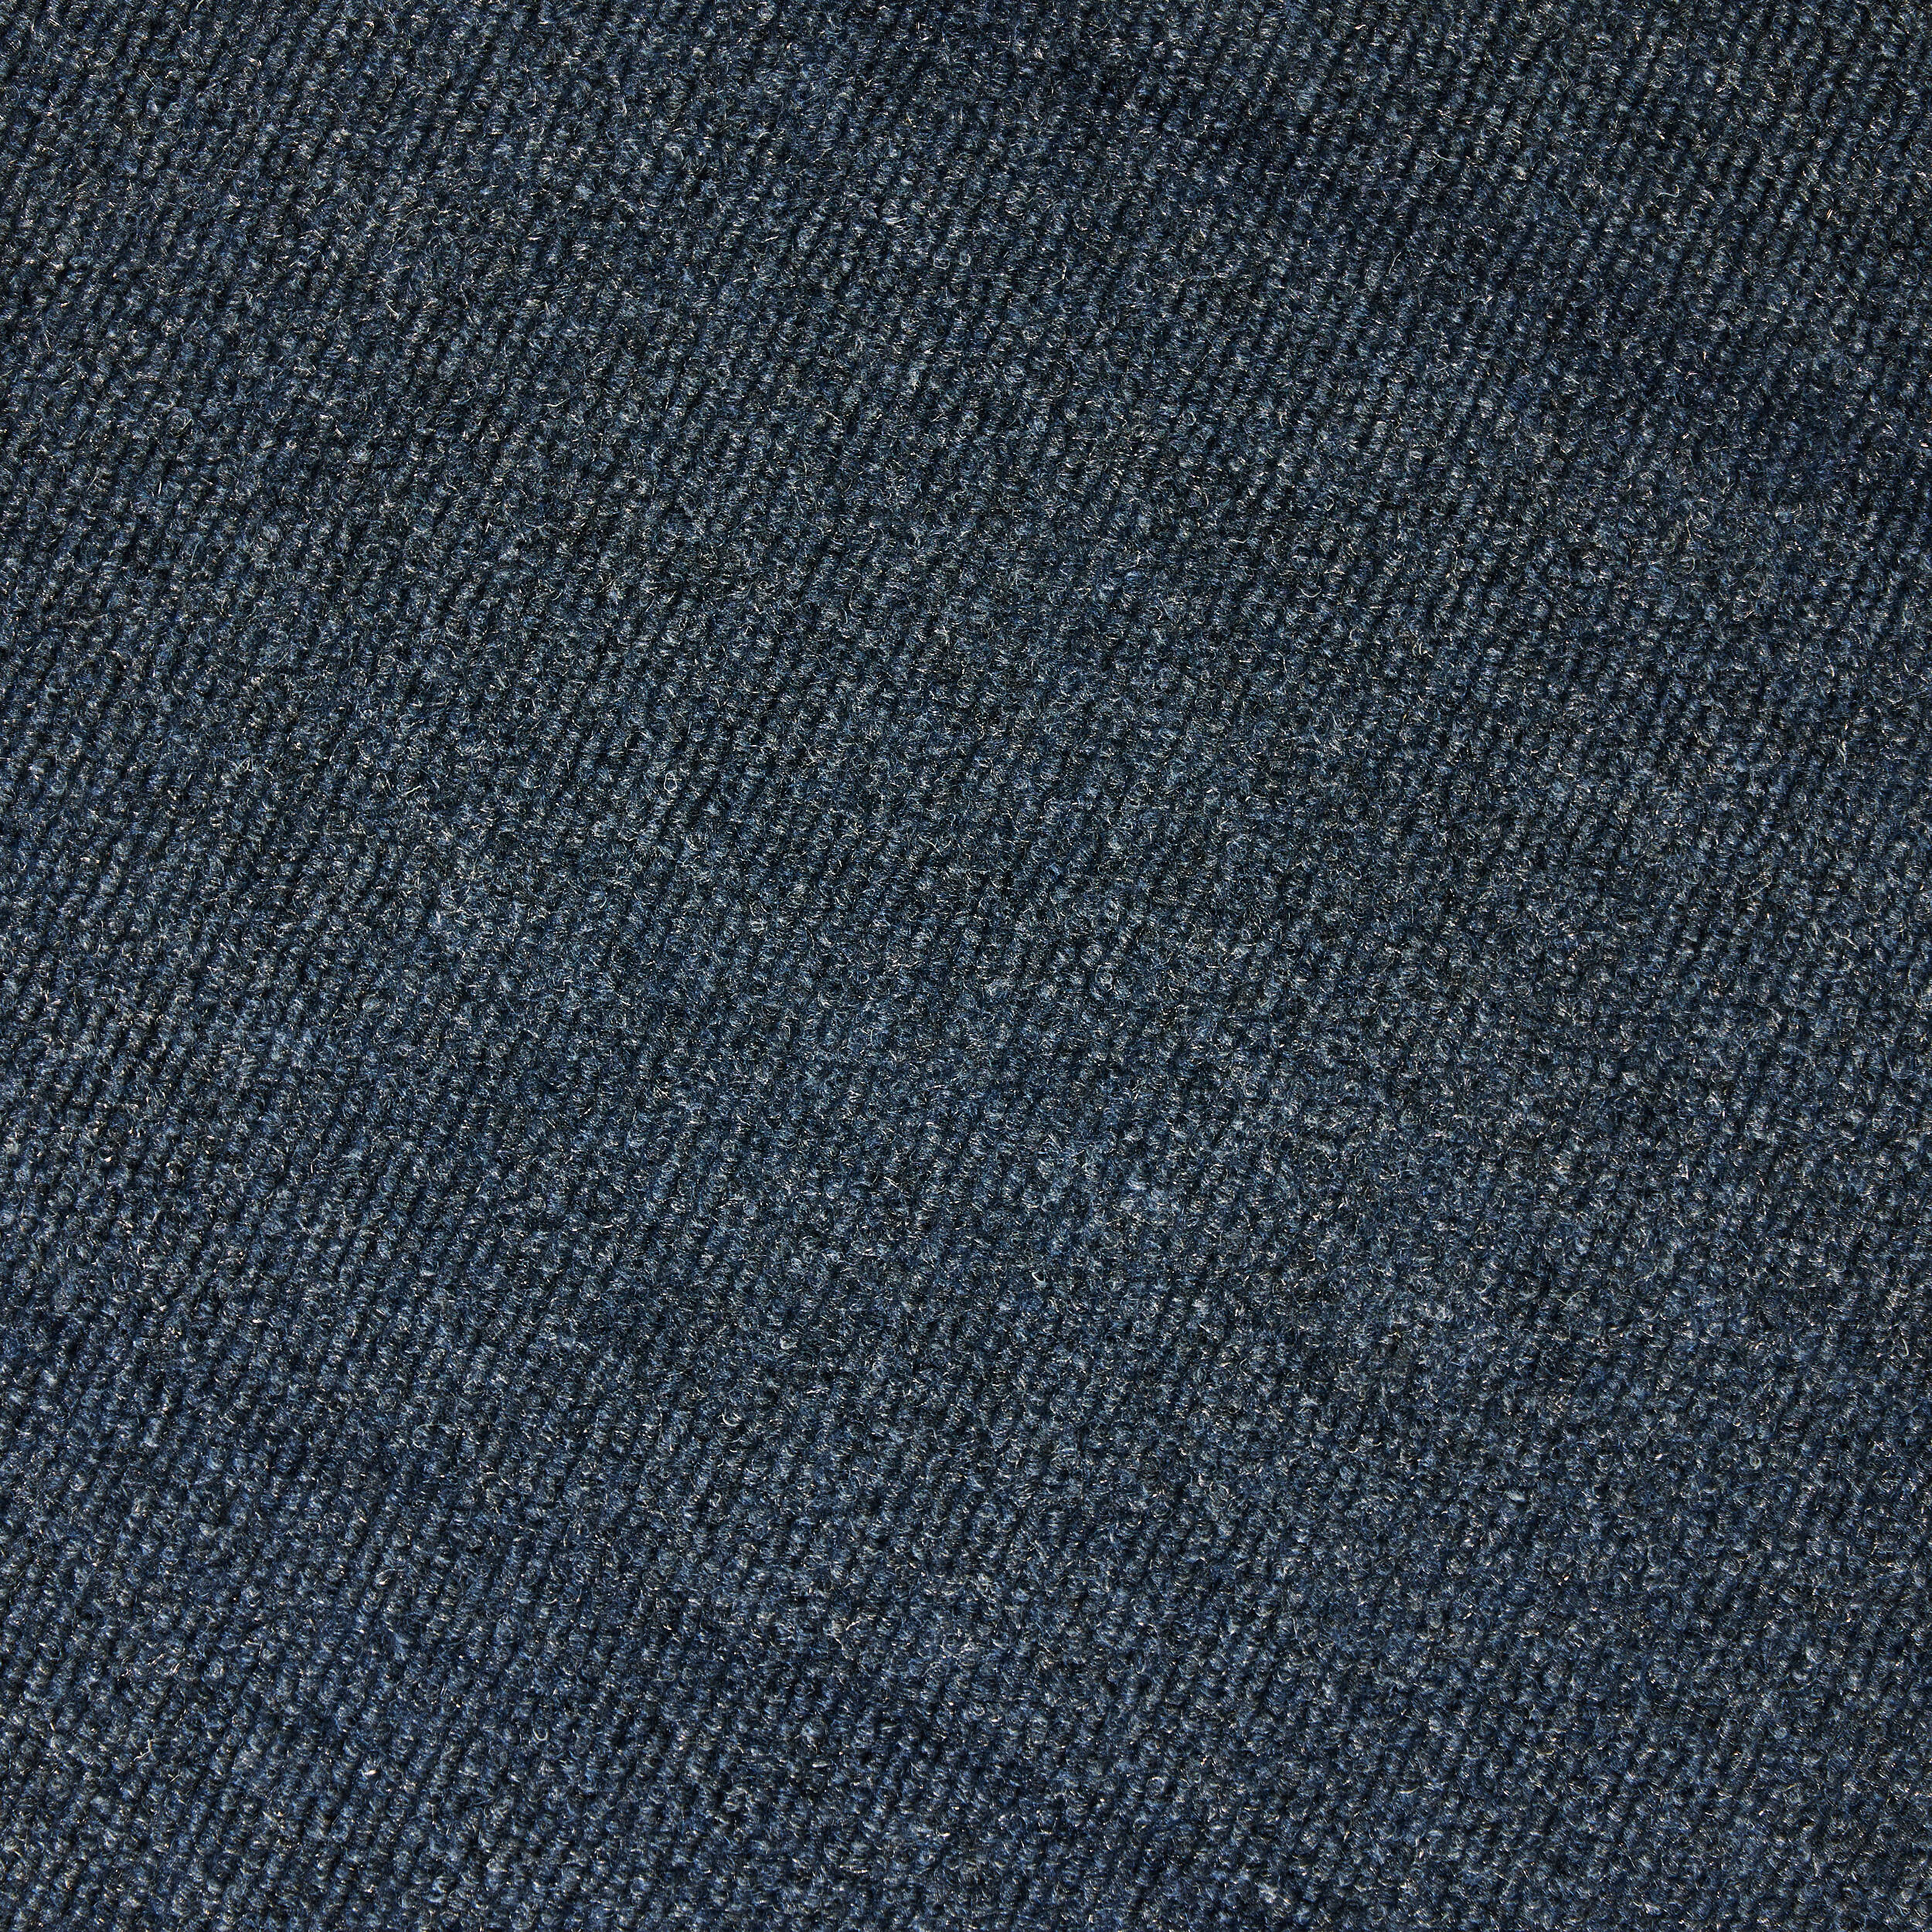 Foss Home and Office Grassland Ocean Blue 17-oz sq yard Solution-dyed ...